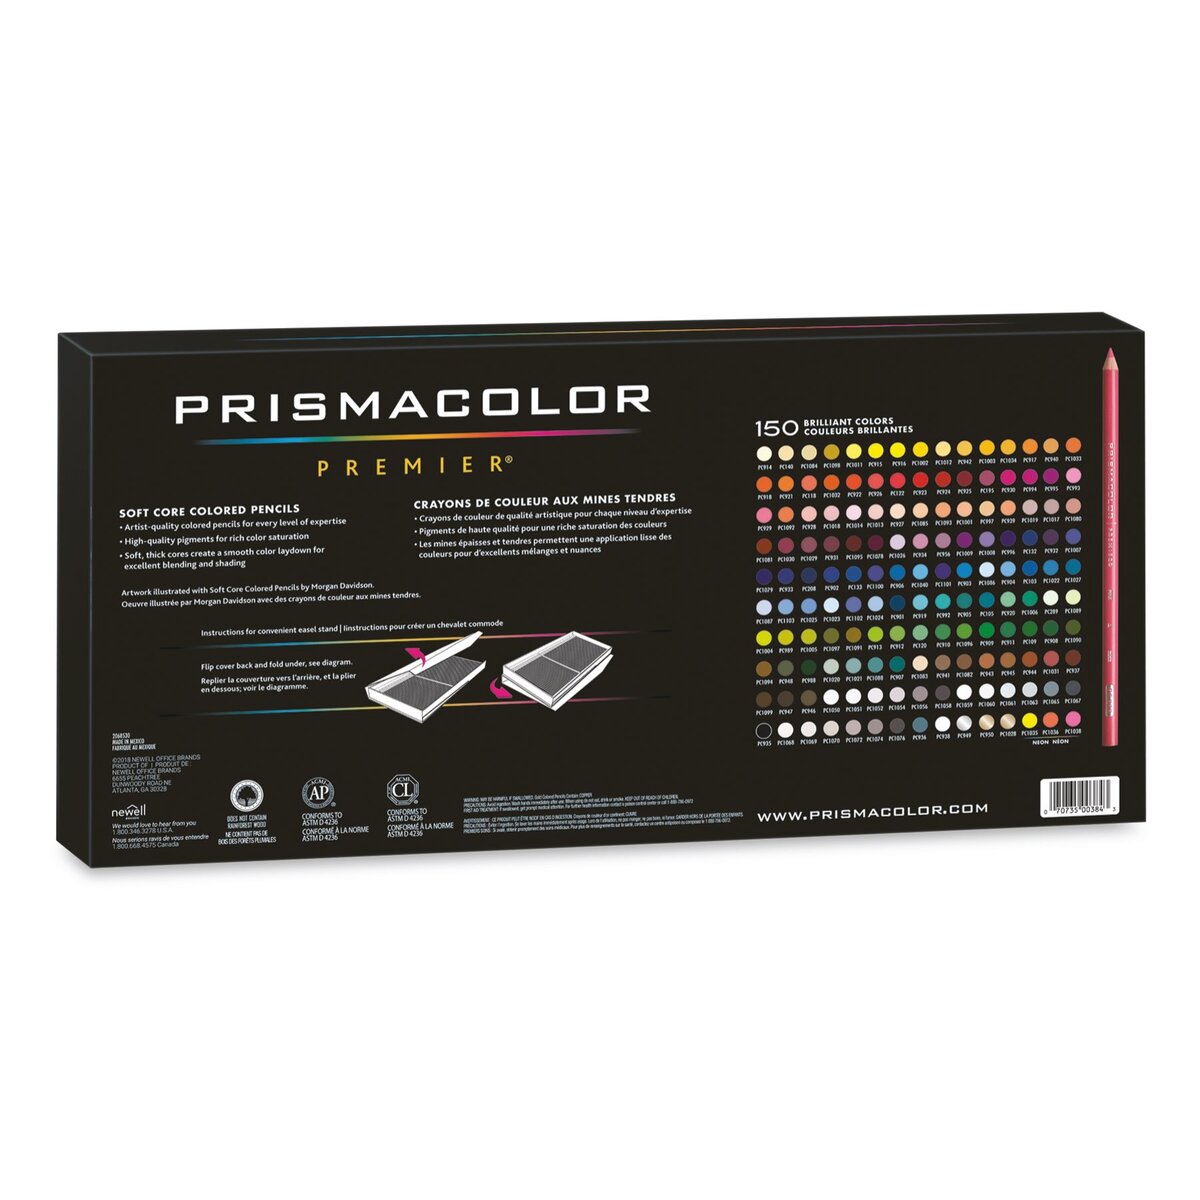 Prismacolor Premier Colored Pencils, Art Supplies for Drawing, Sketching,  Adult Coloring Soft Core Color Pencils, 150 Pack : Wood Colored Pencils :  Office Products 